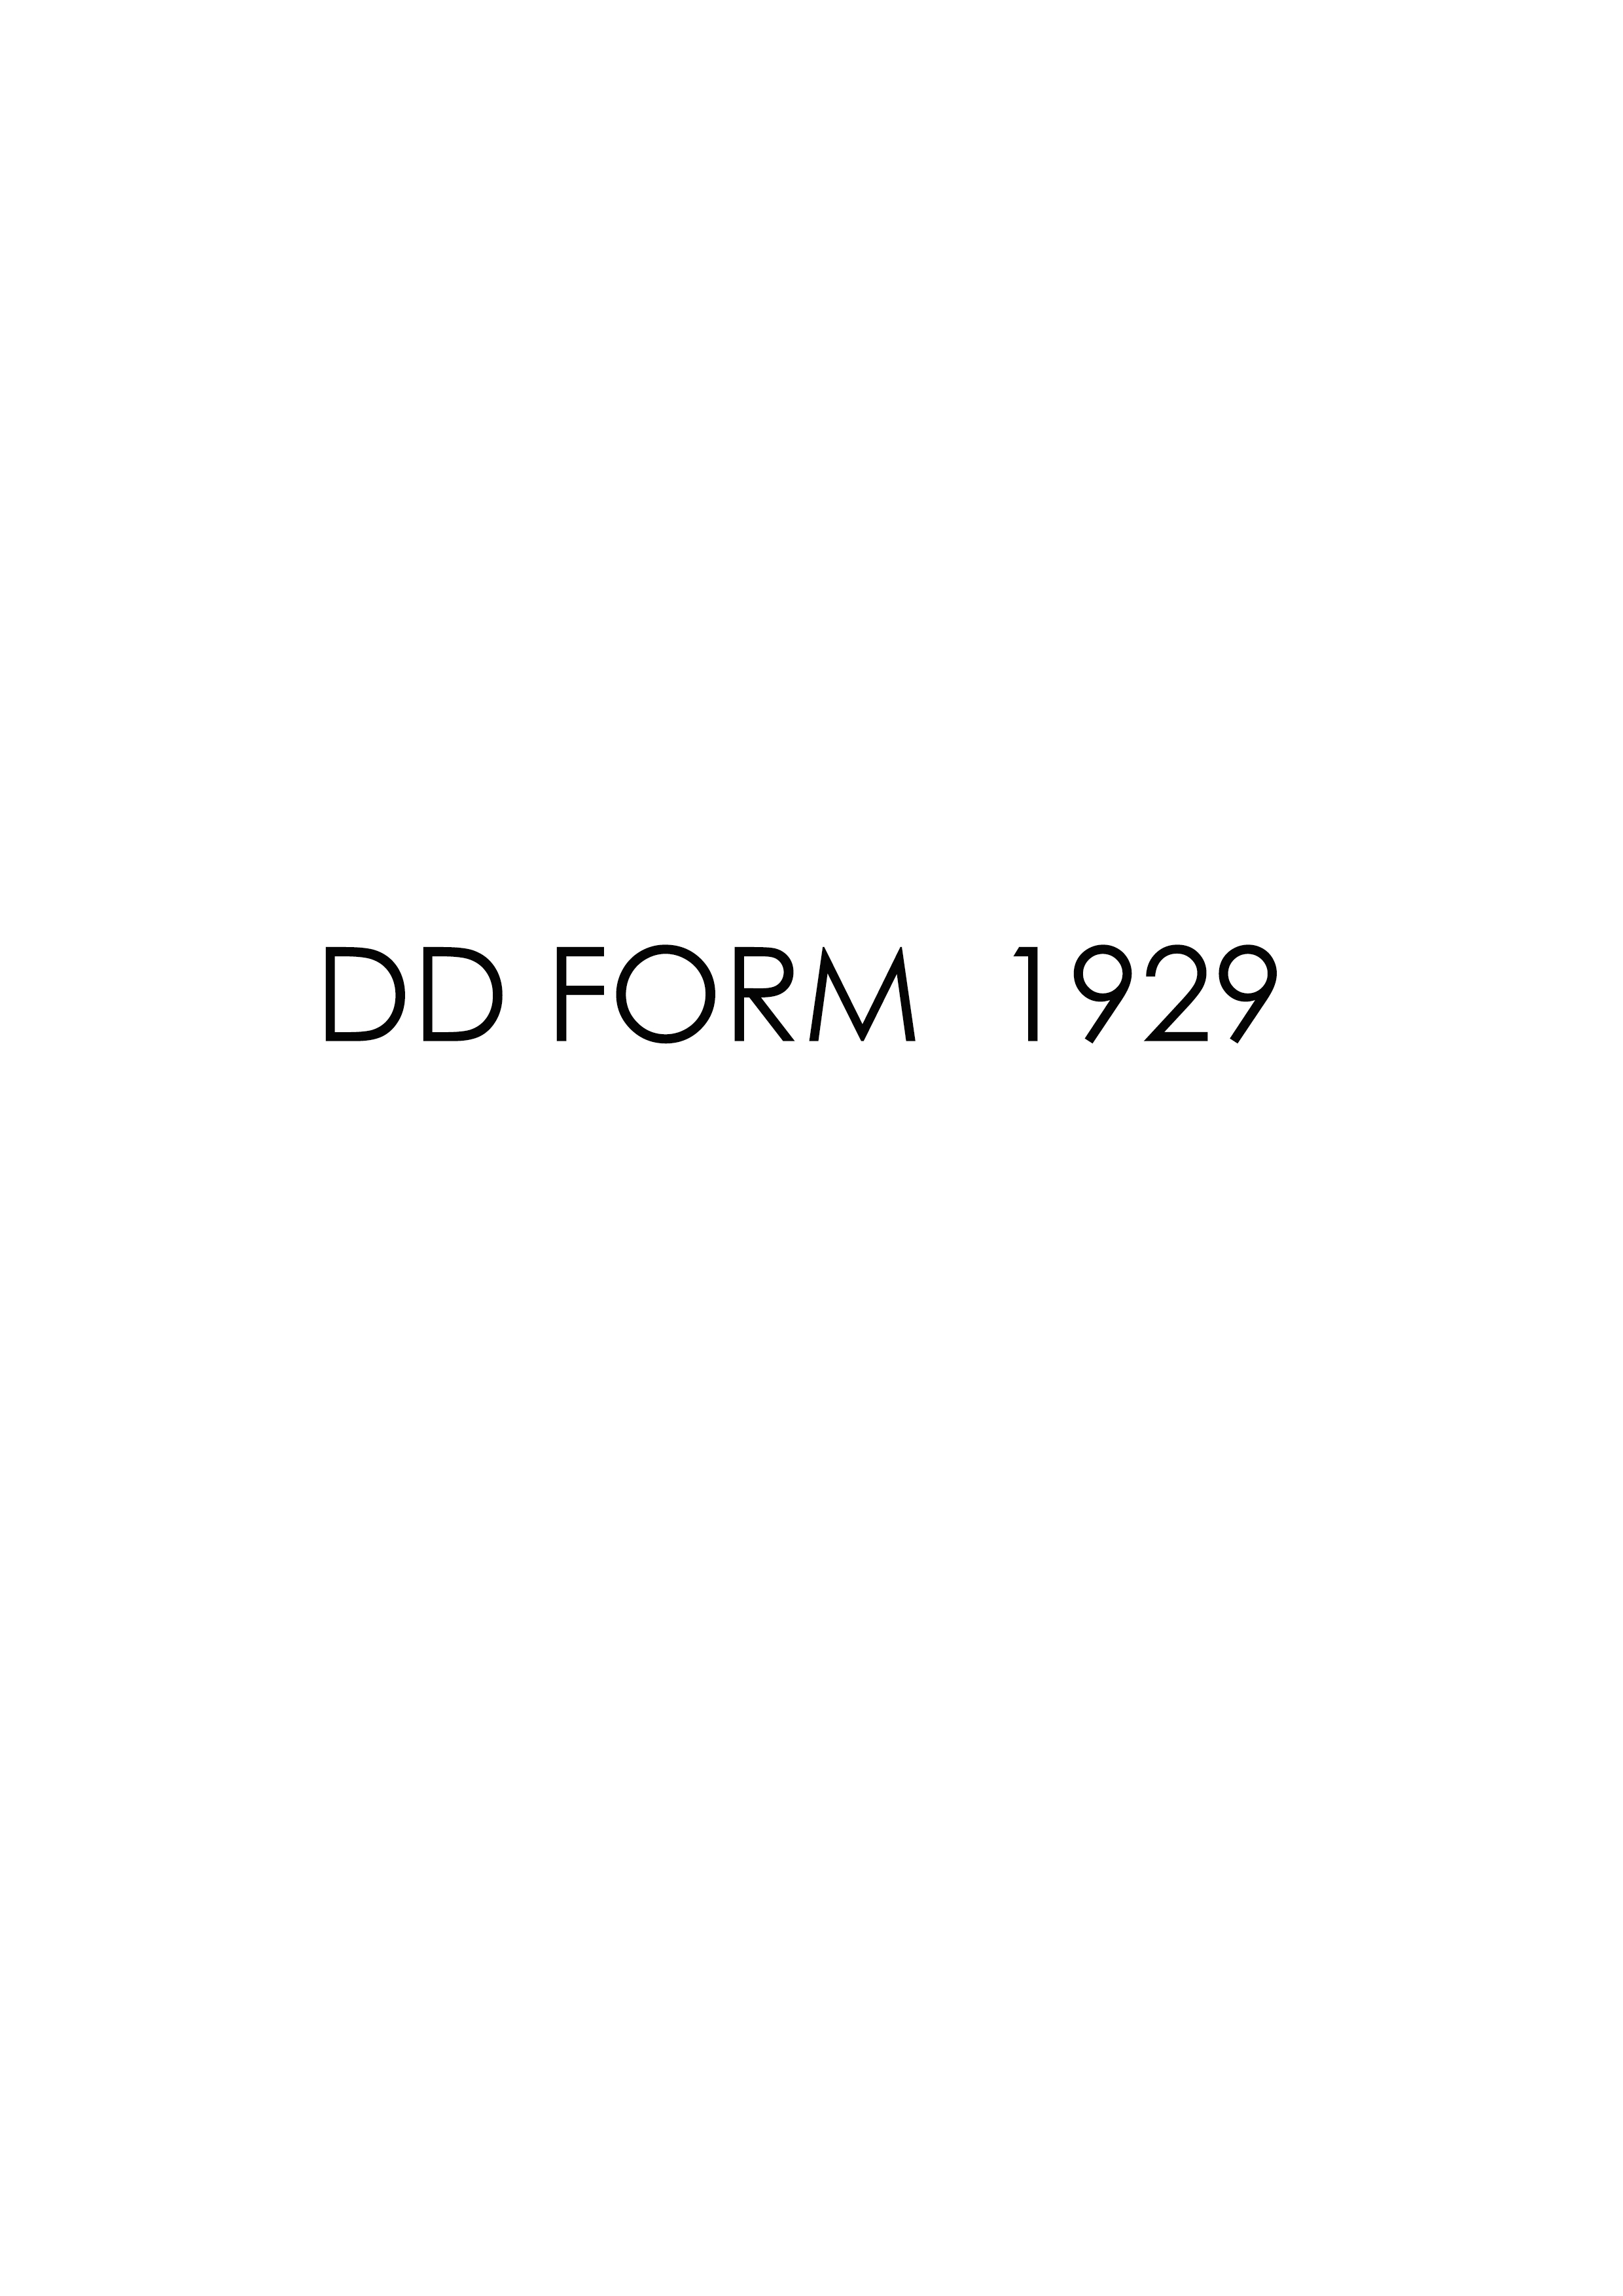 Download Fillable dd Form 1929